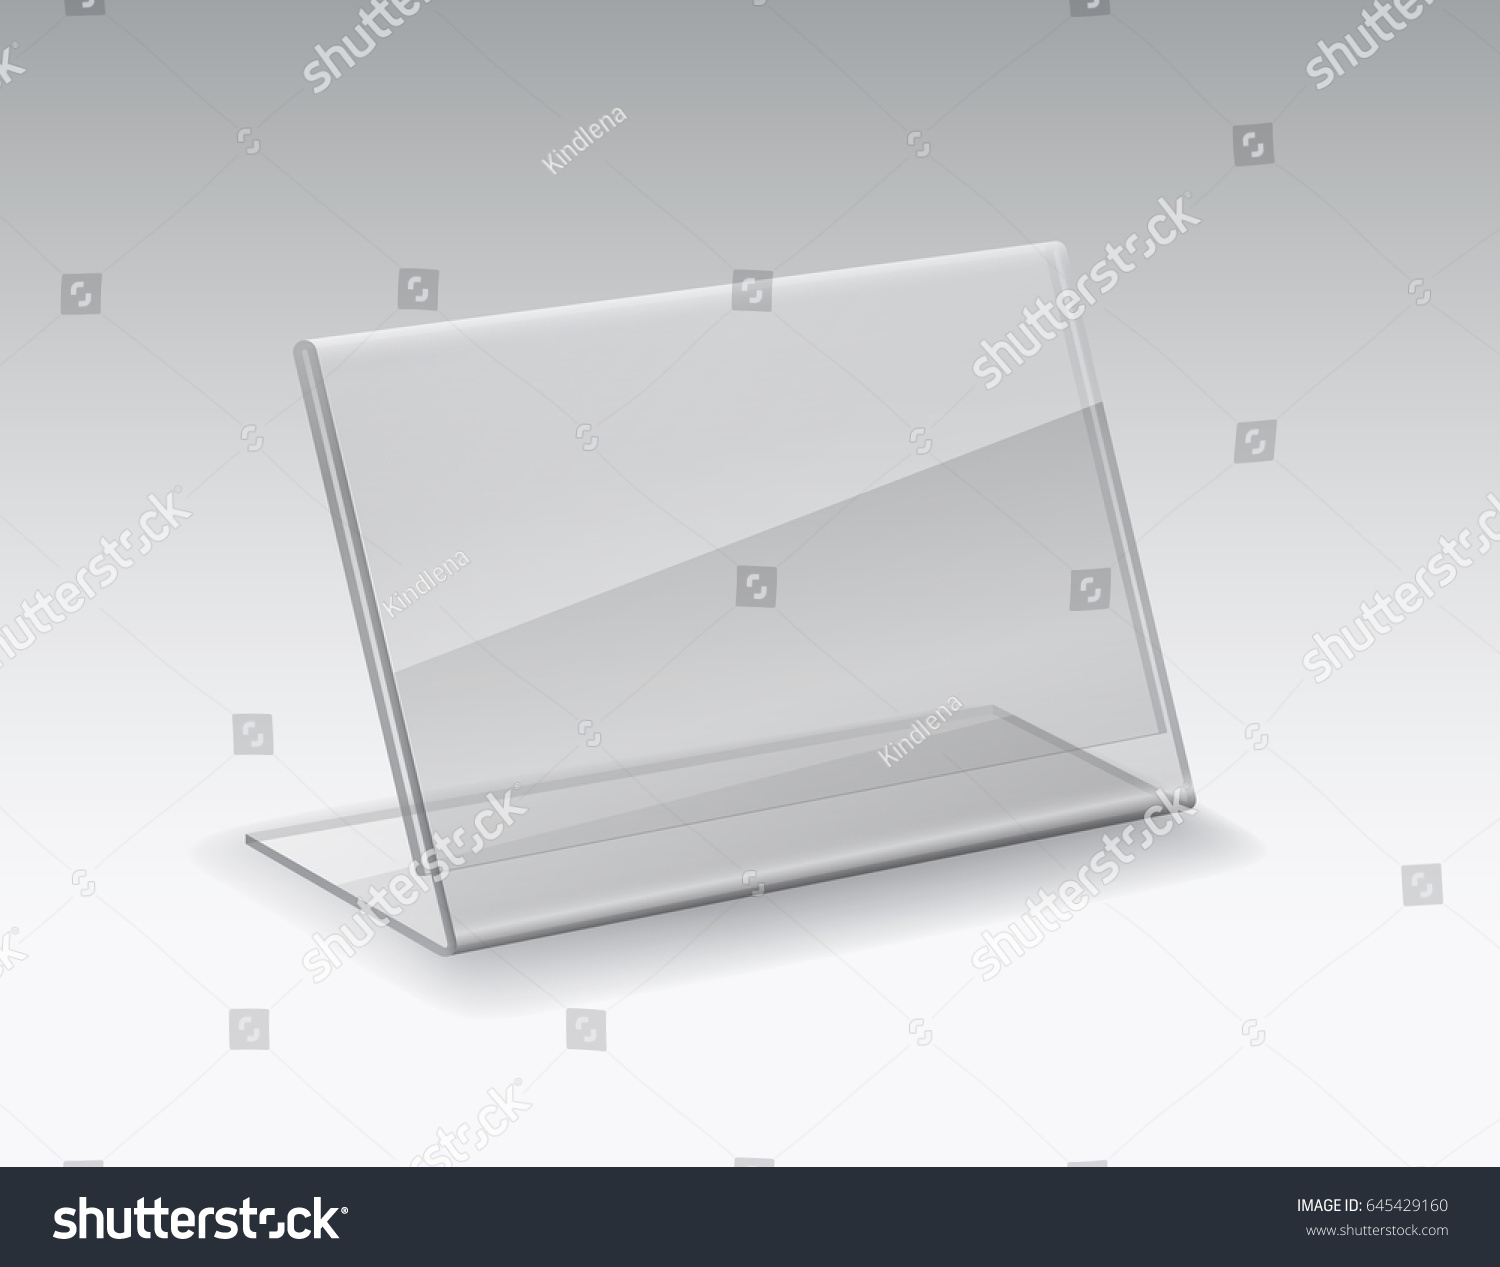 Download Tag Price Blank Acrylic Plexiglass Table Stock Vector 645429160 - Shutterstock